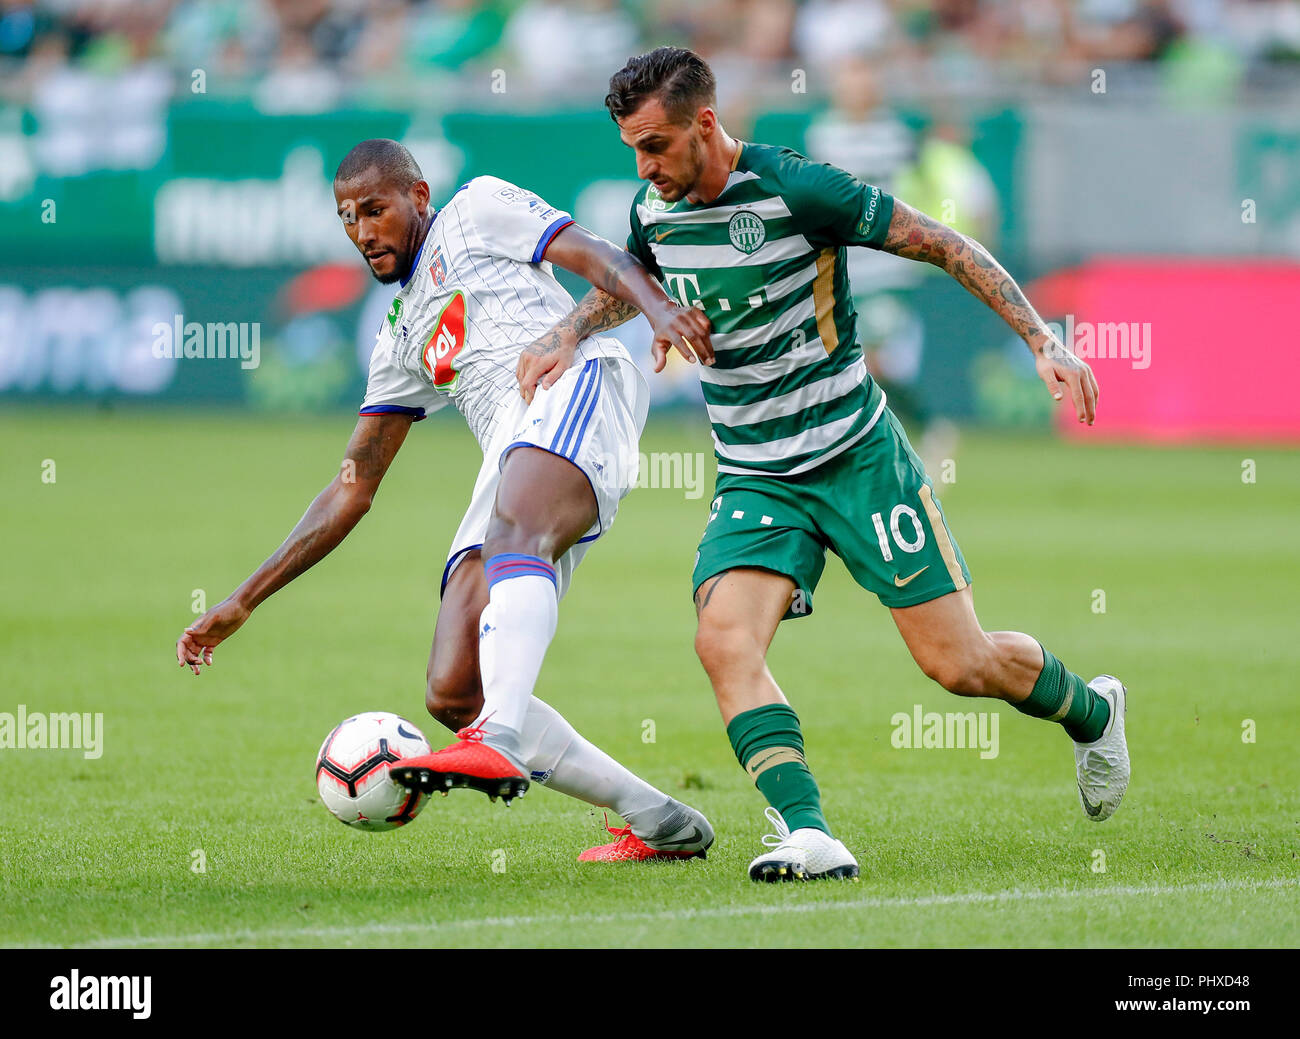 Budapest, Hungary. 2 September 2018. (l-r) Paulo Vinicius of MOL Vidi FC  competes for the ball with Davide Lanzafame of Ferencvarosi TC during the  Hungarian OTP Bank Liga match between Ferencvarosi TC